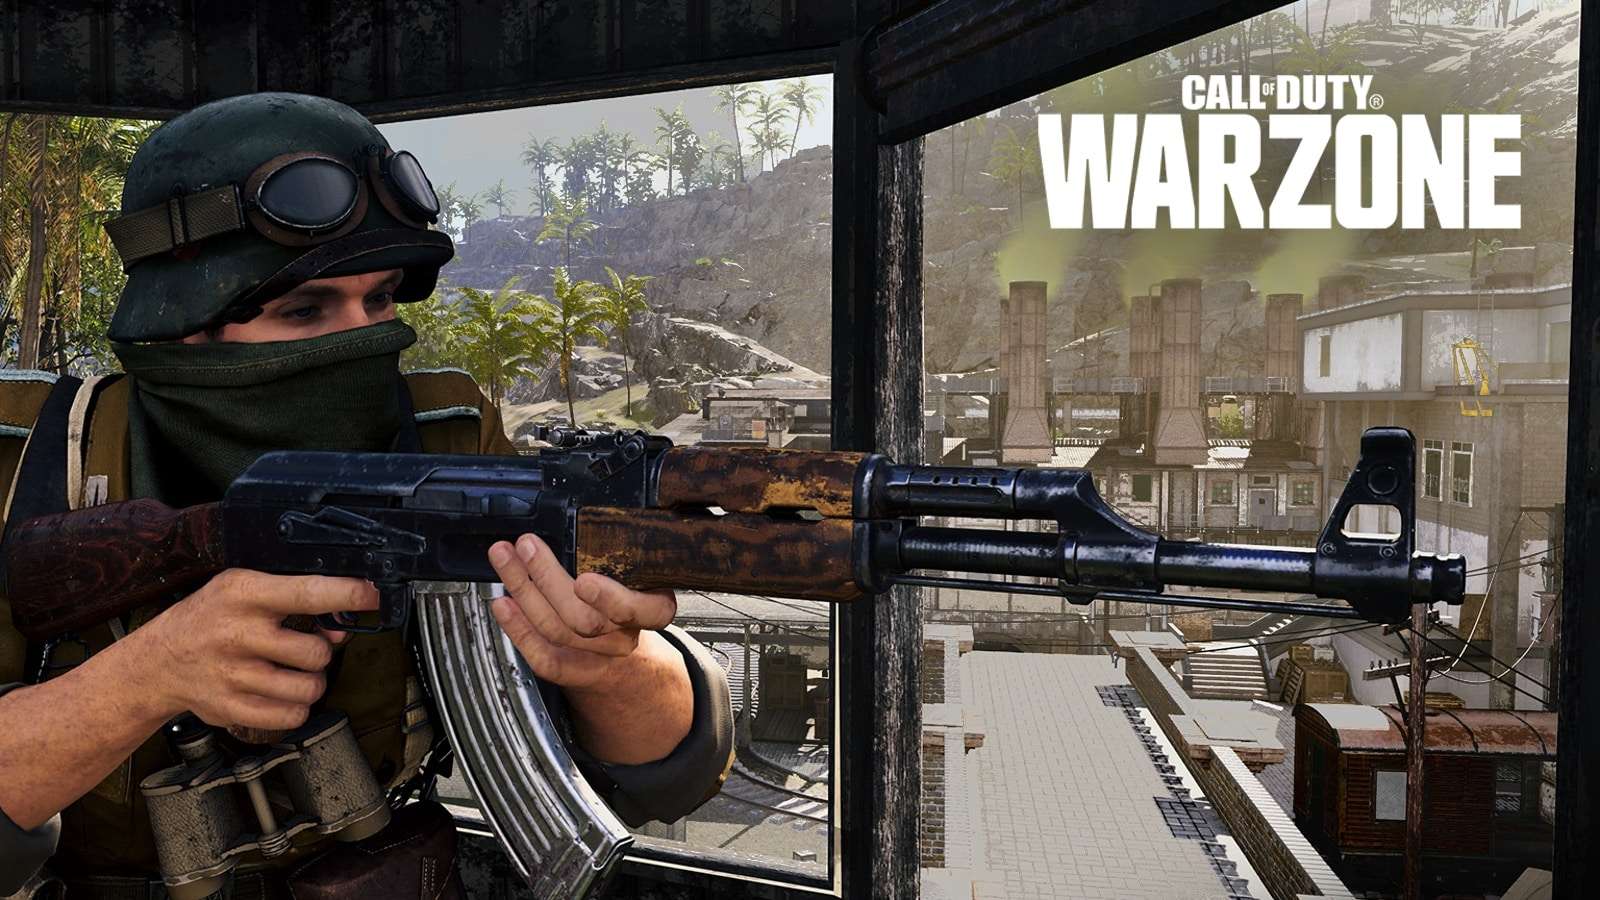 Warzone player holding gun in Caldera tower with Warzone logo in top right corner